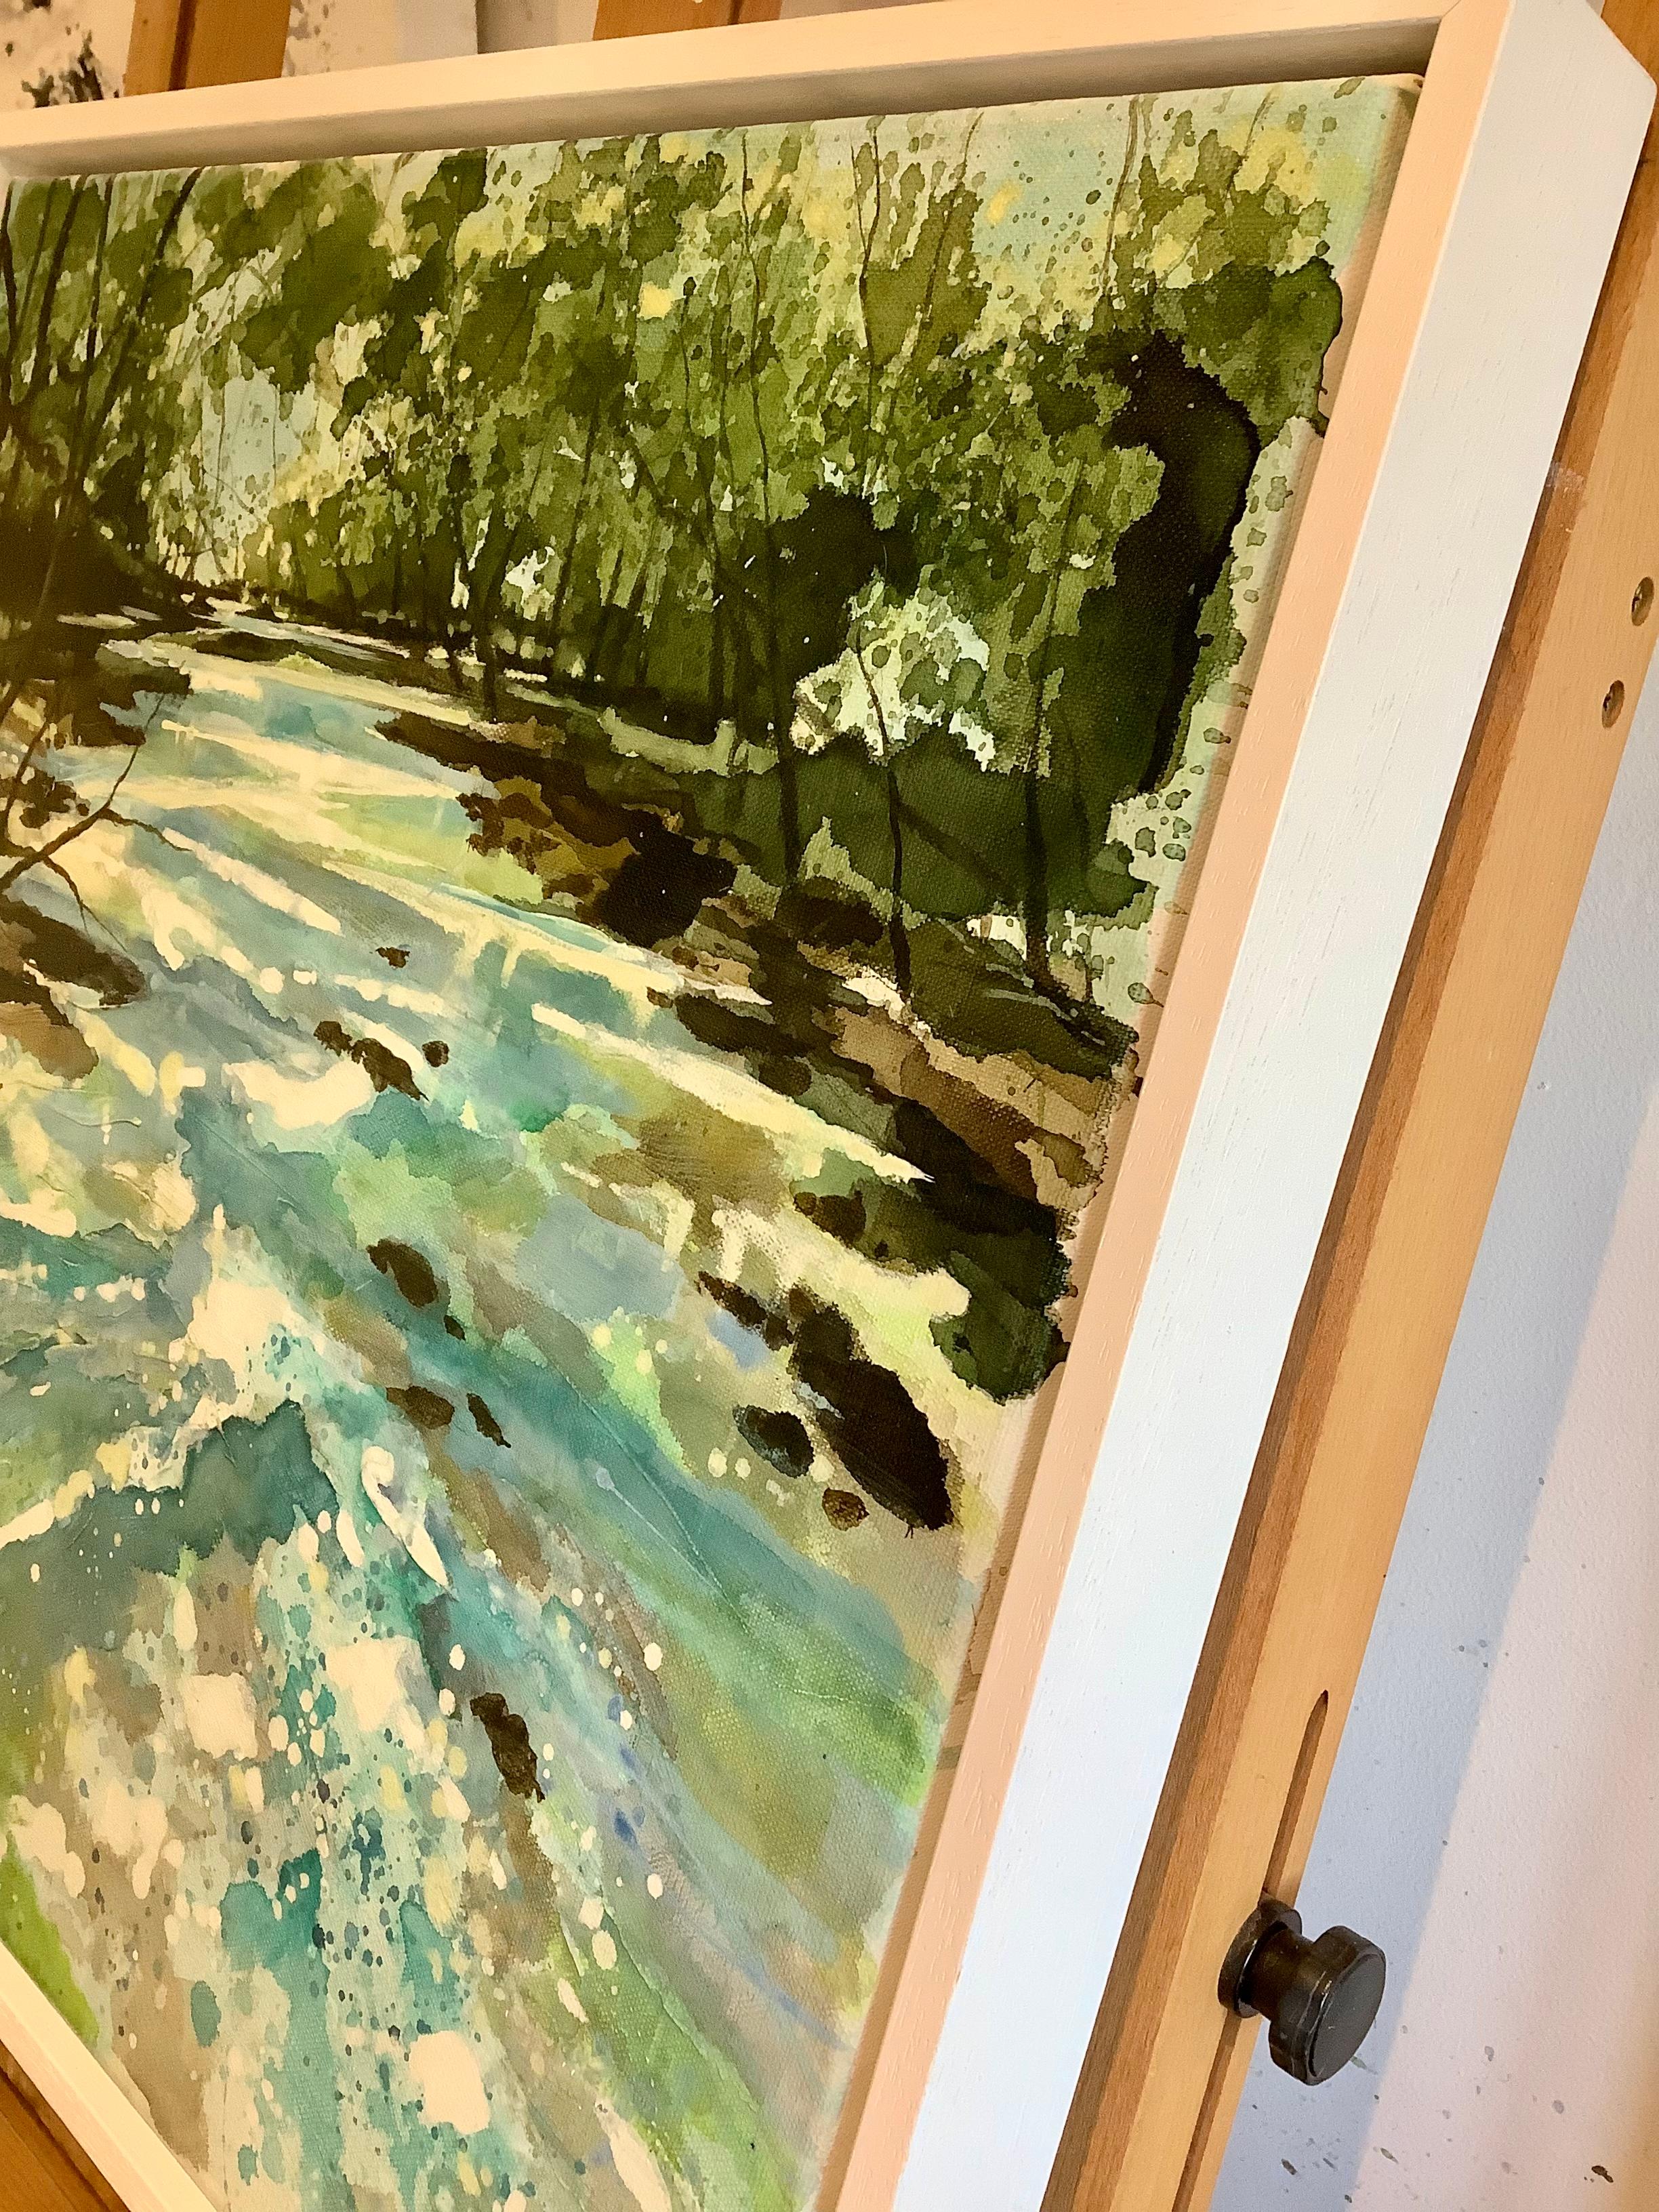 Always Our Place, Original painting, Landscape art, River Wye, Hereford, Green - Gray Abstract Painting by Adele Riley